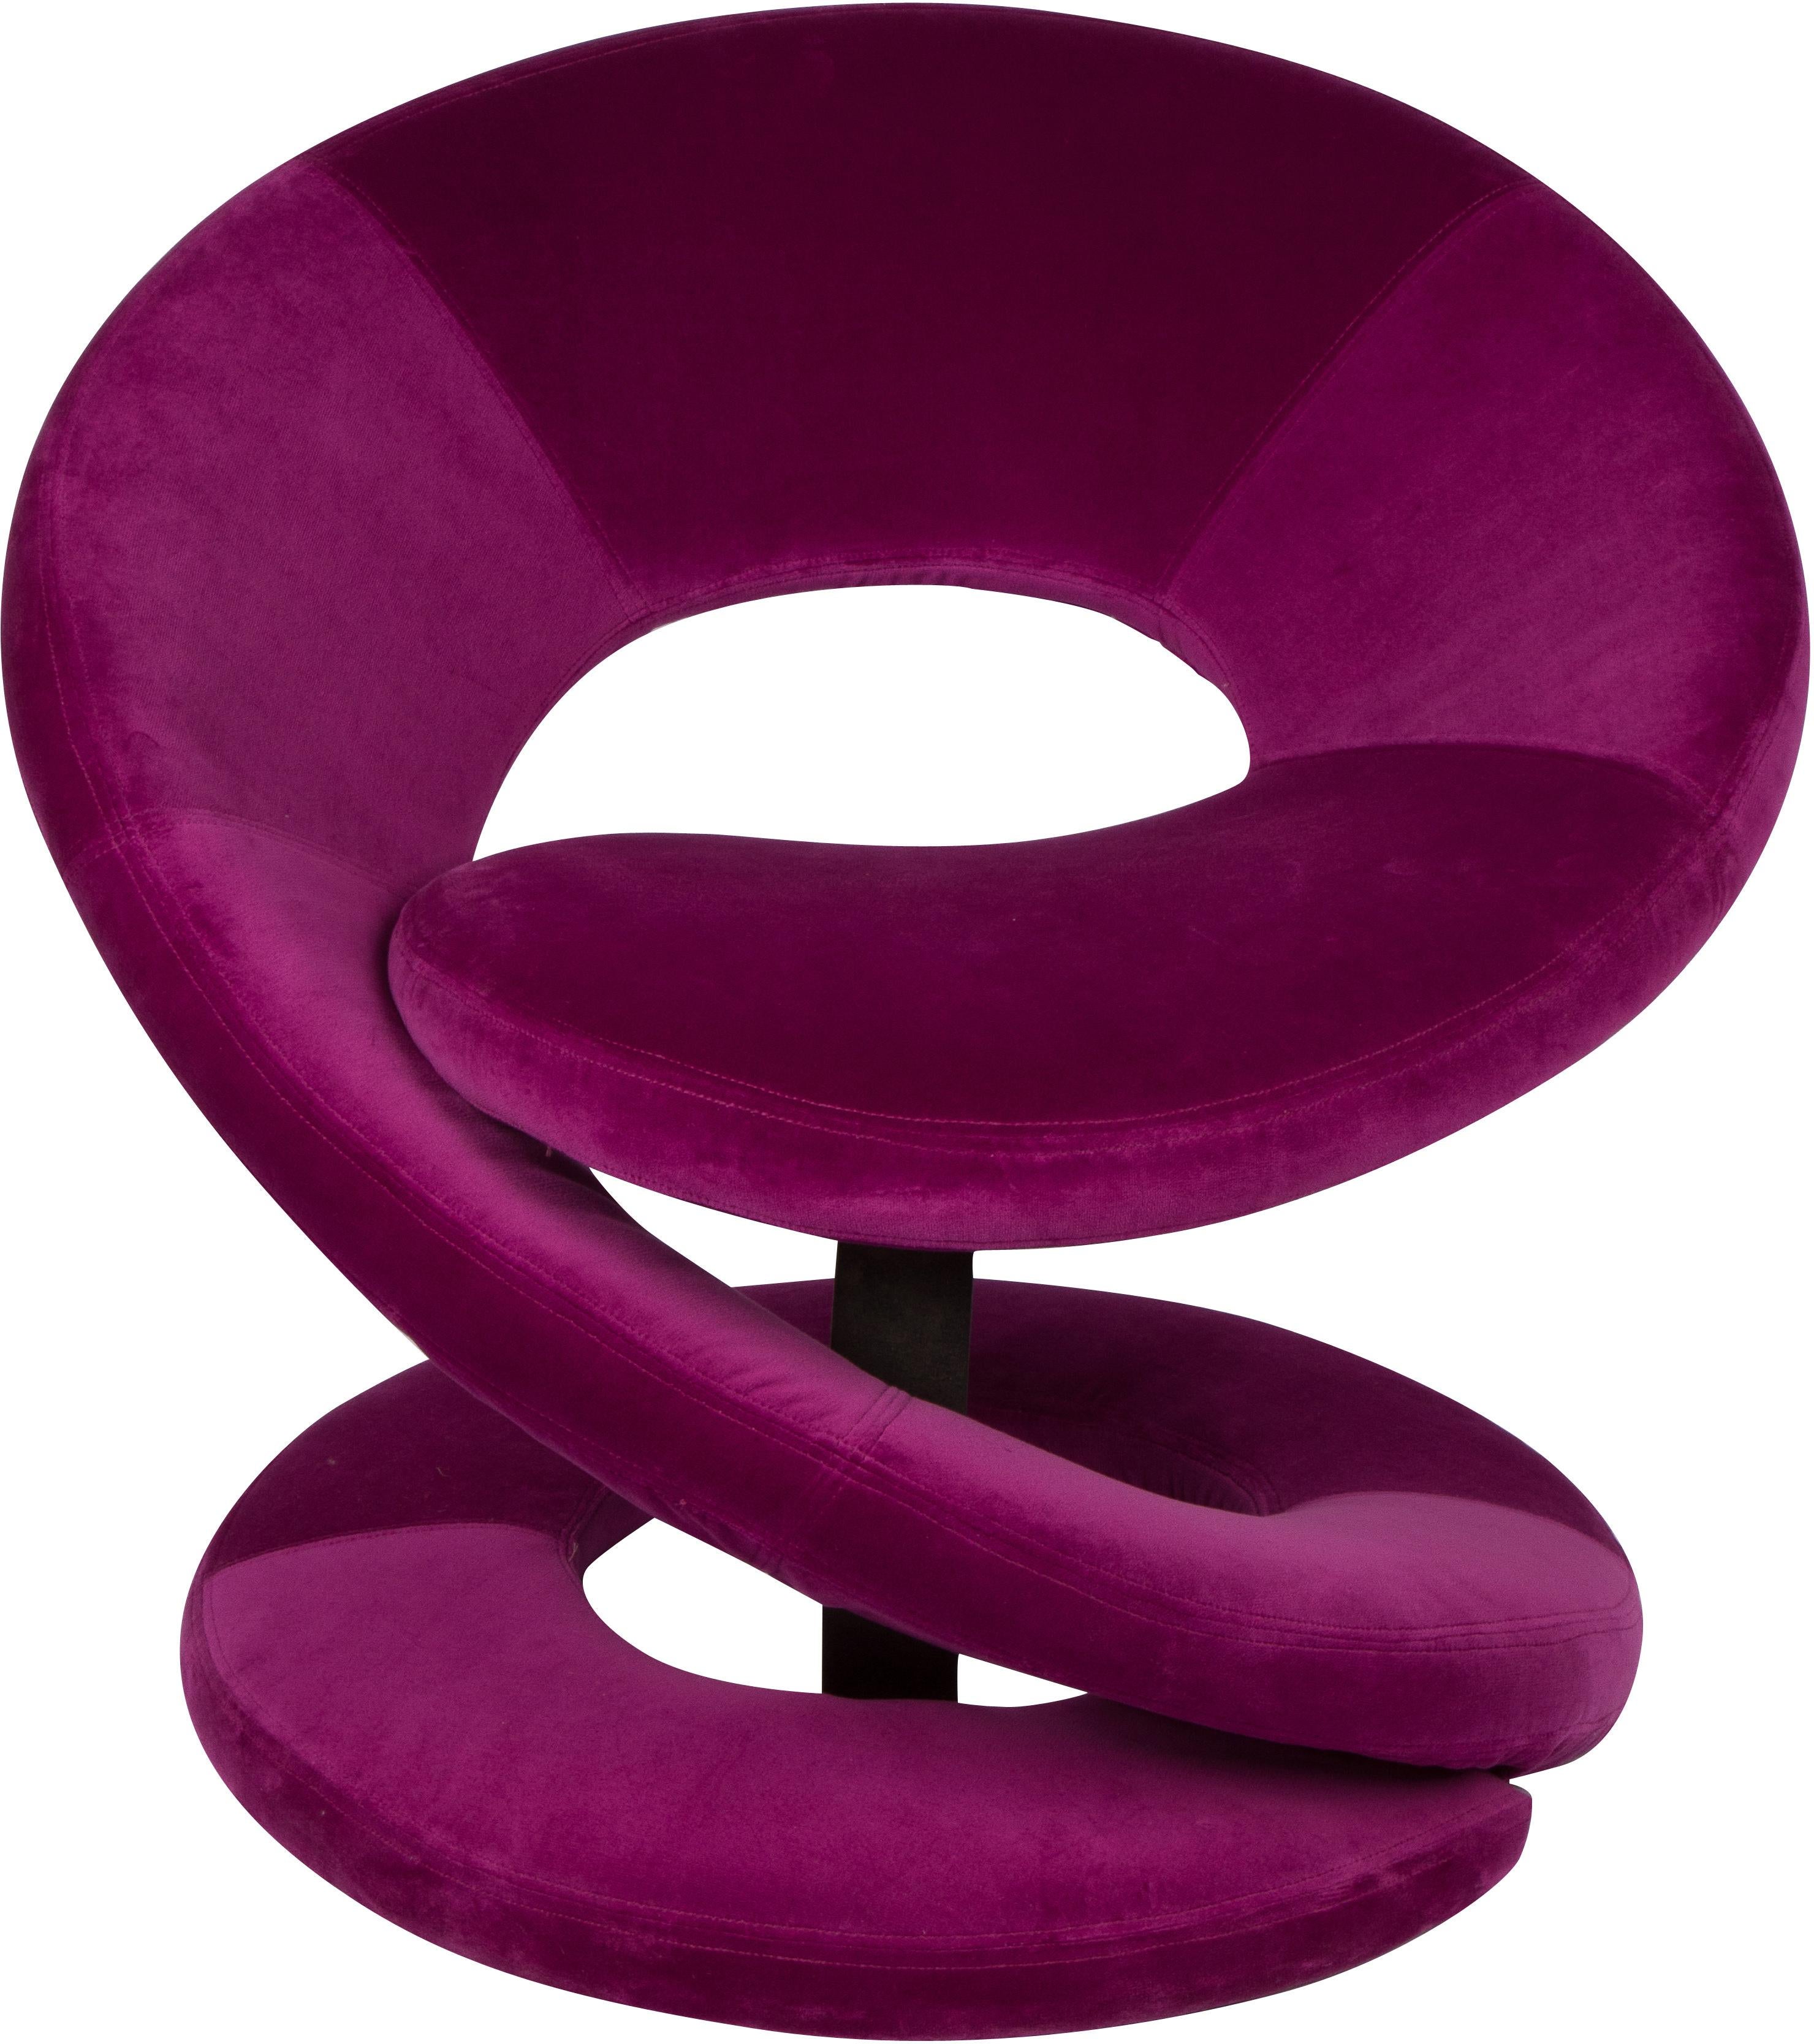 Sculptural, sexy, pair of lounge chairs in the manner of Louis Durot. Recently re-upholstered in a fuchsia cotton velvet.